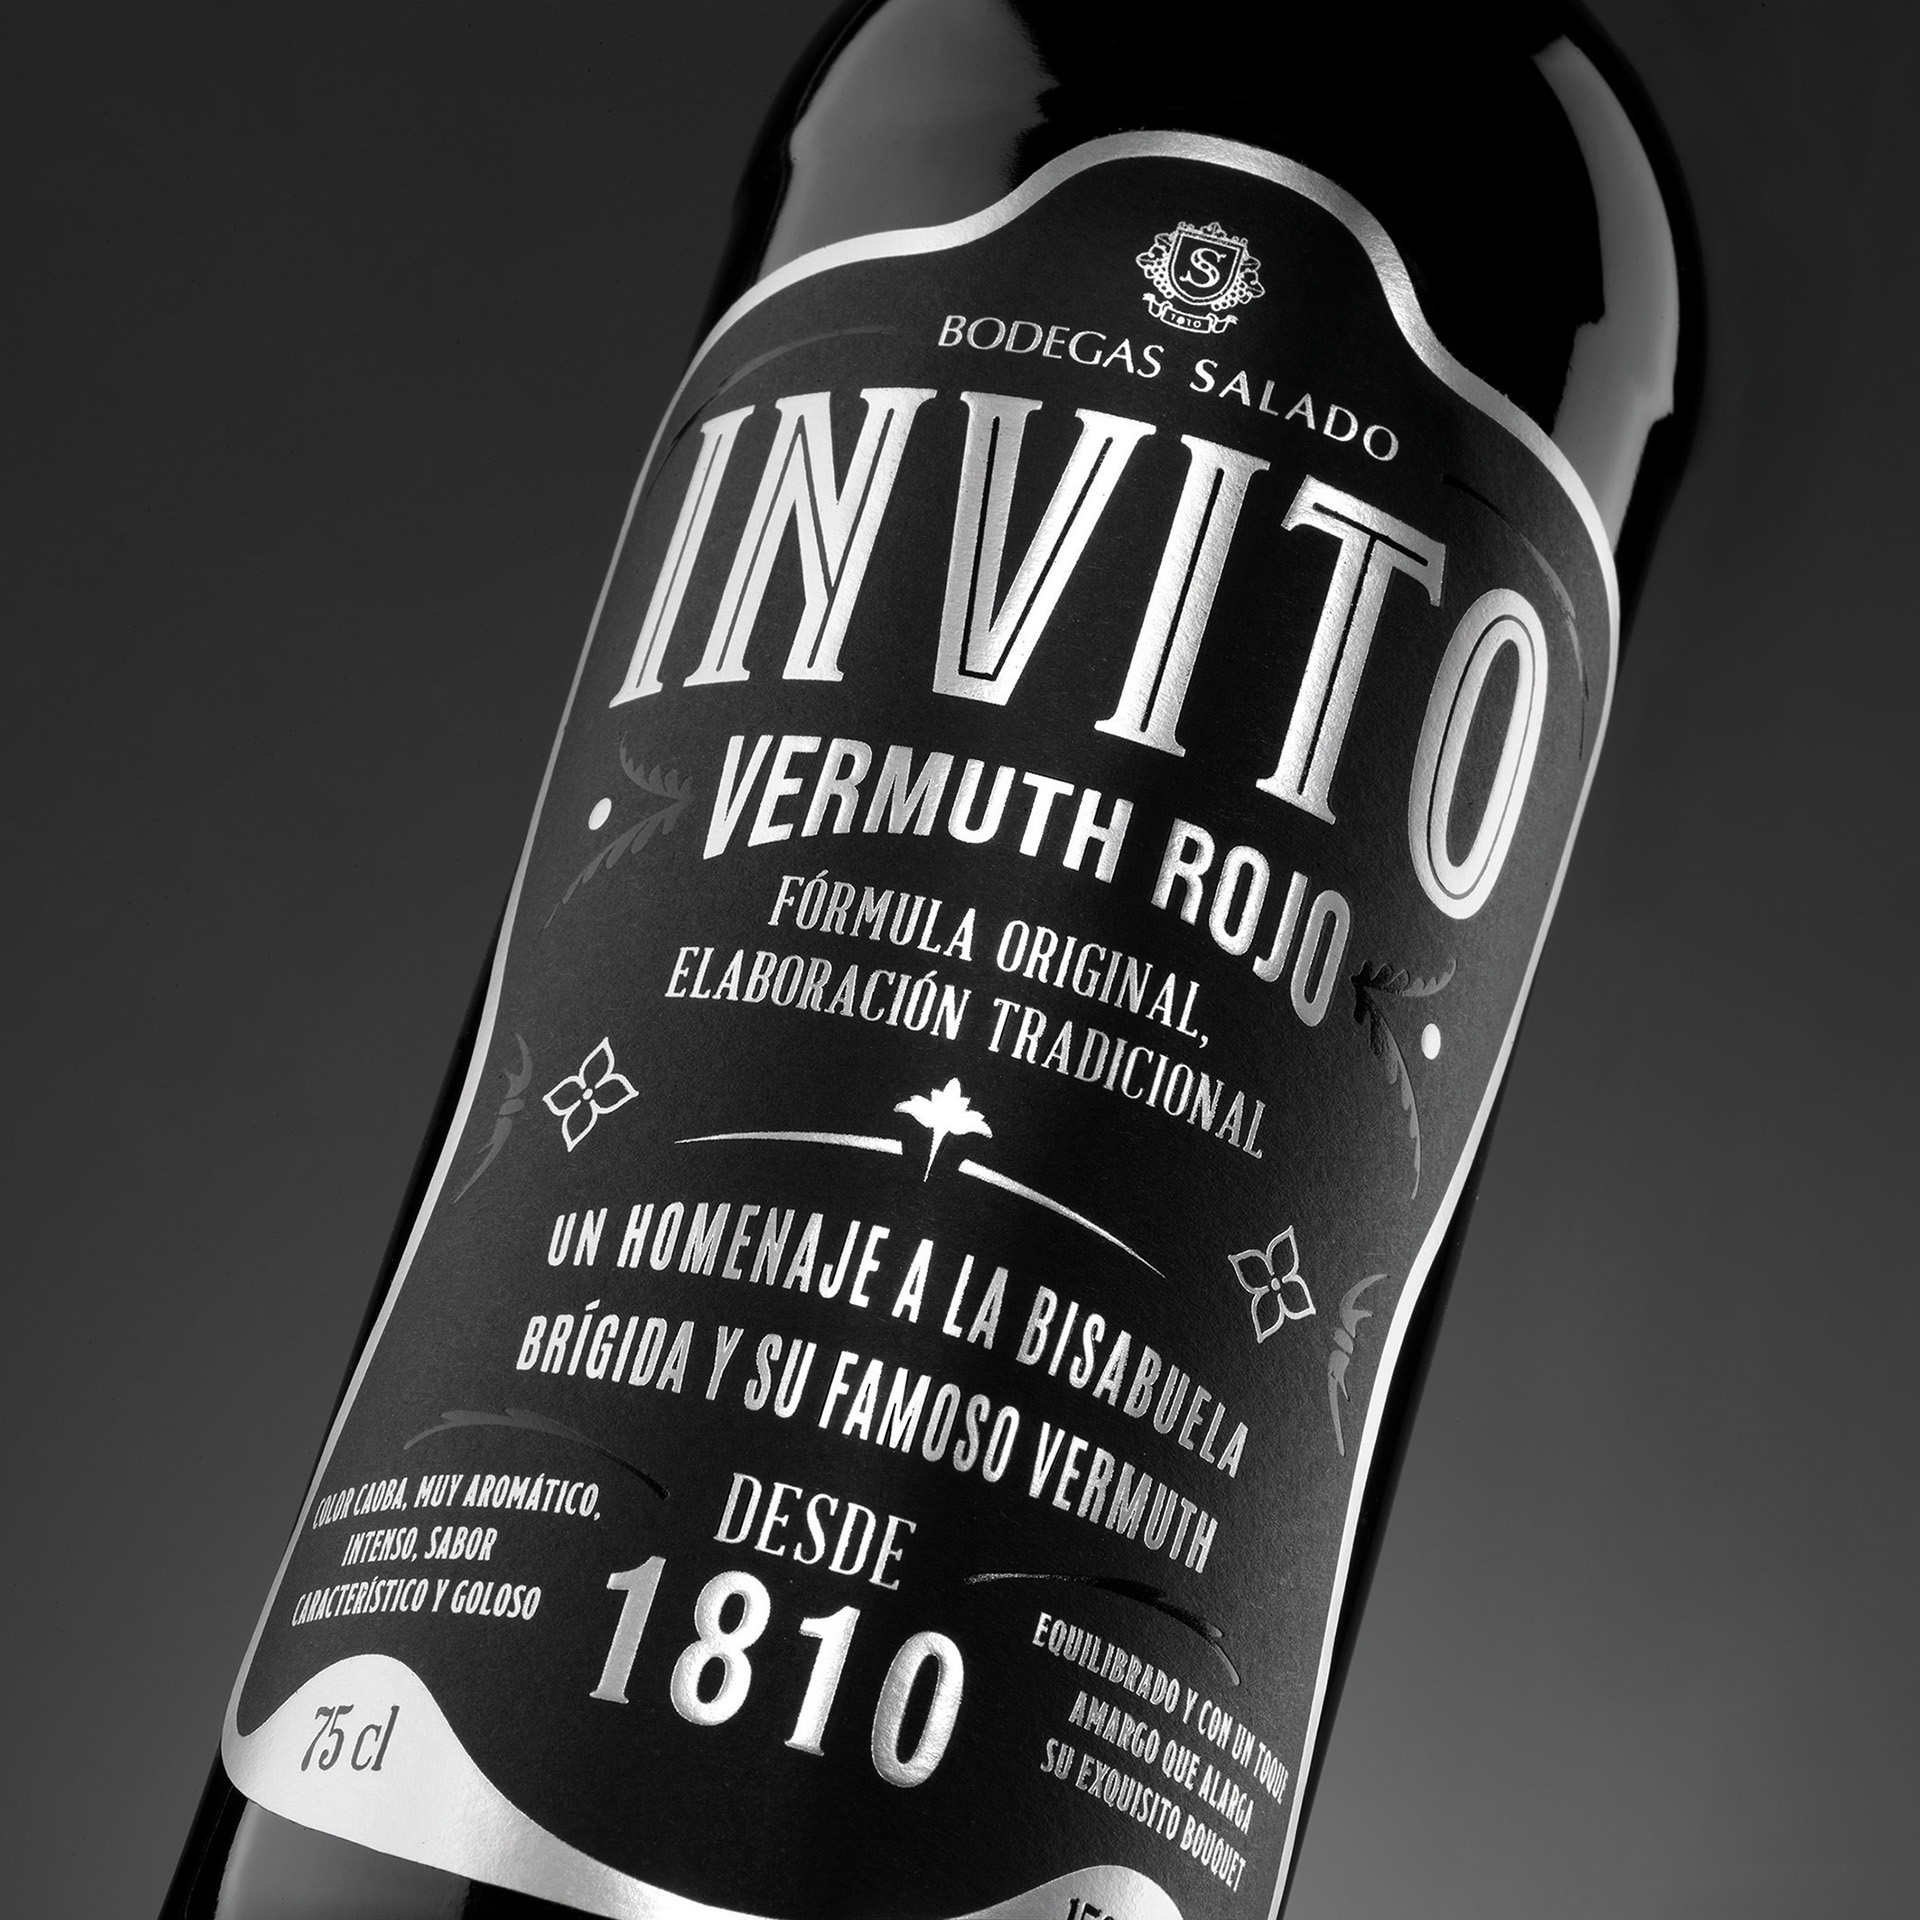 Invito Vermouth I All The Magic and Charm of Andalusia Bottled as an Aperitif